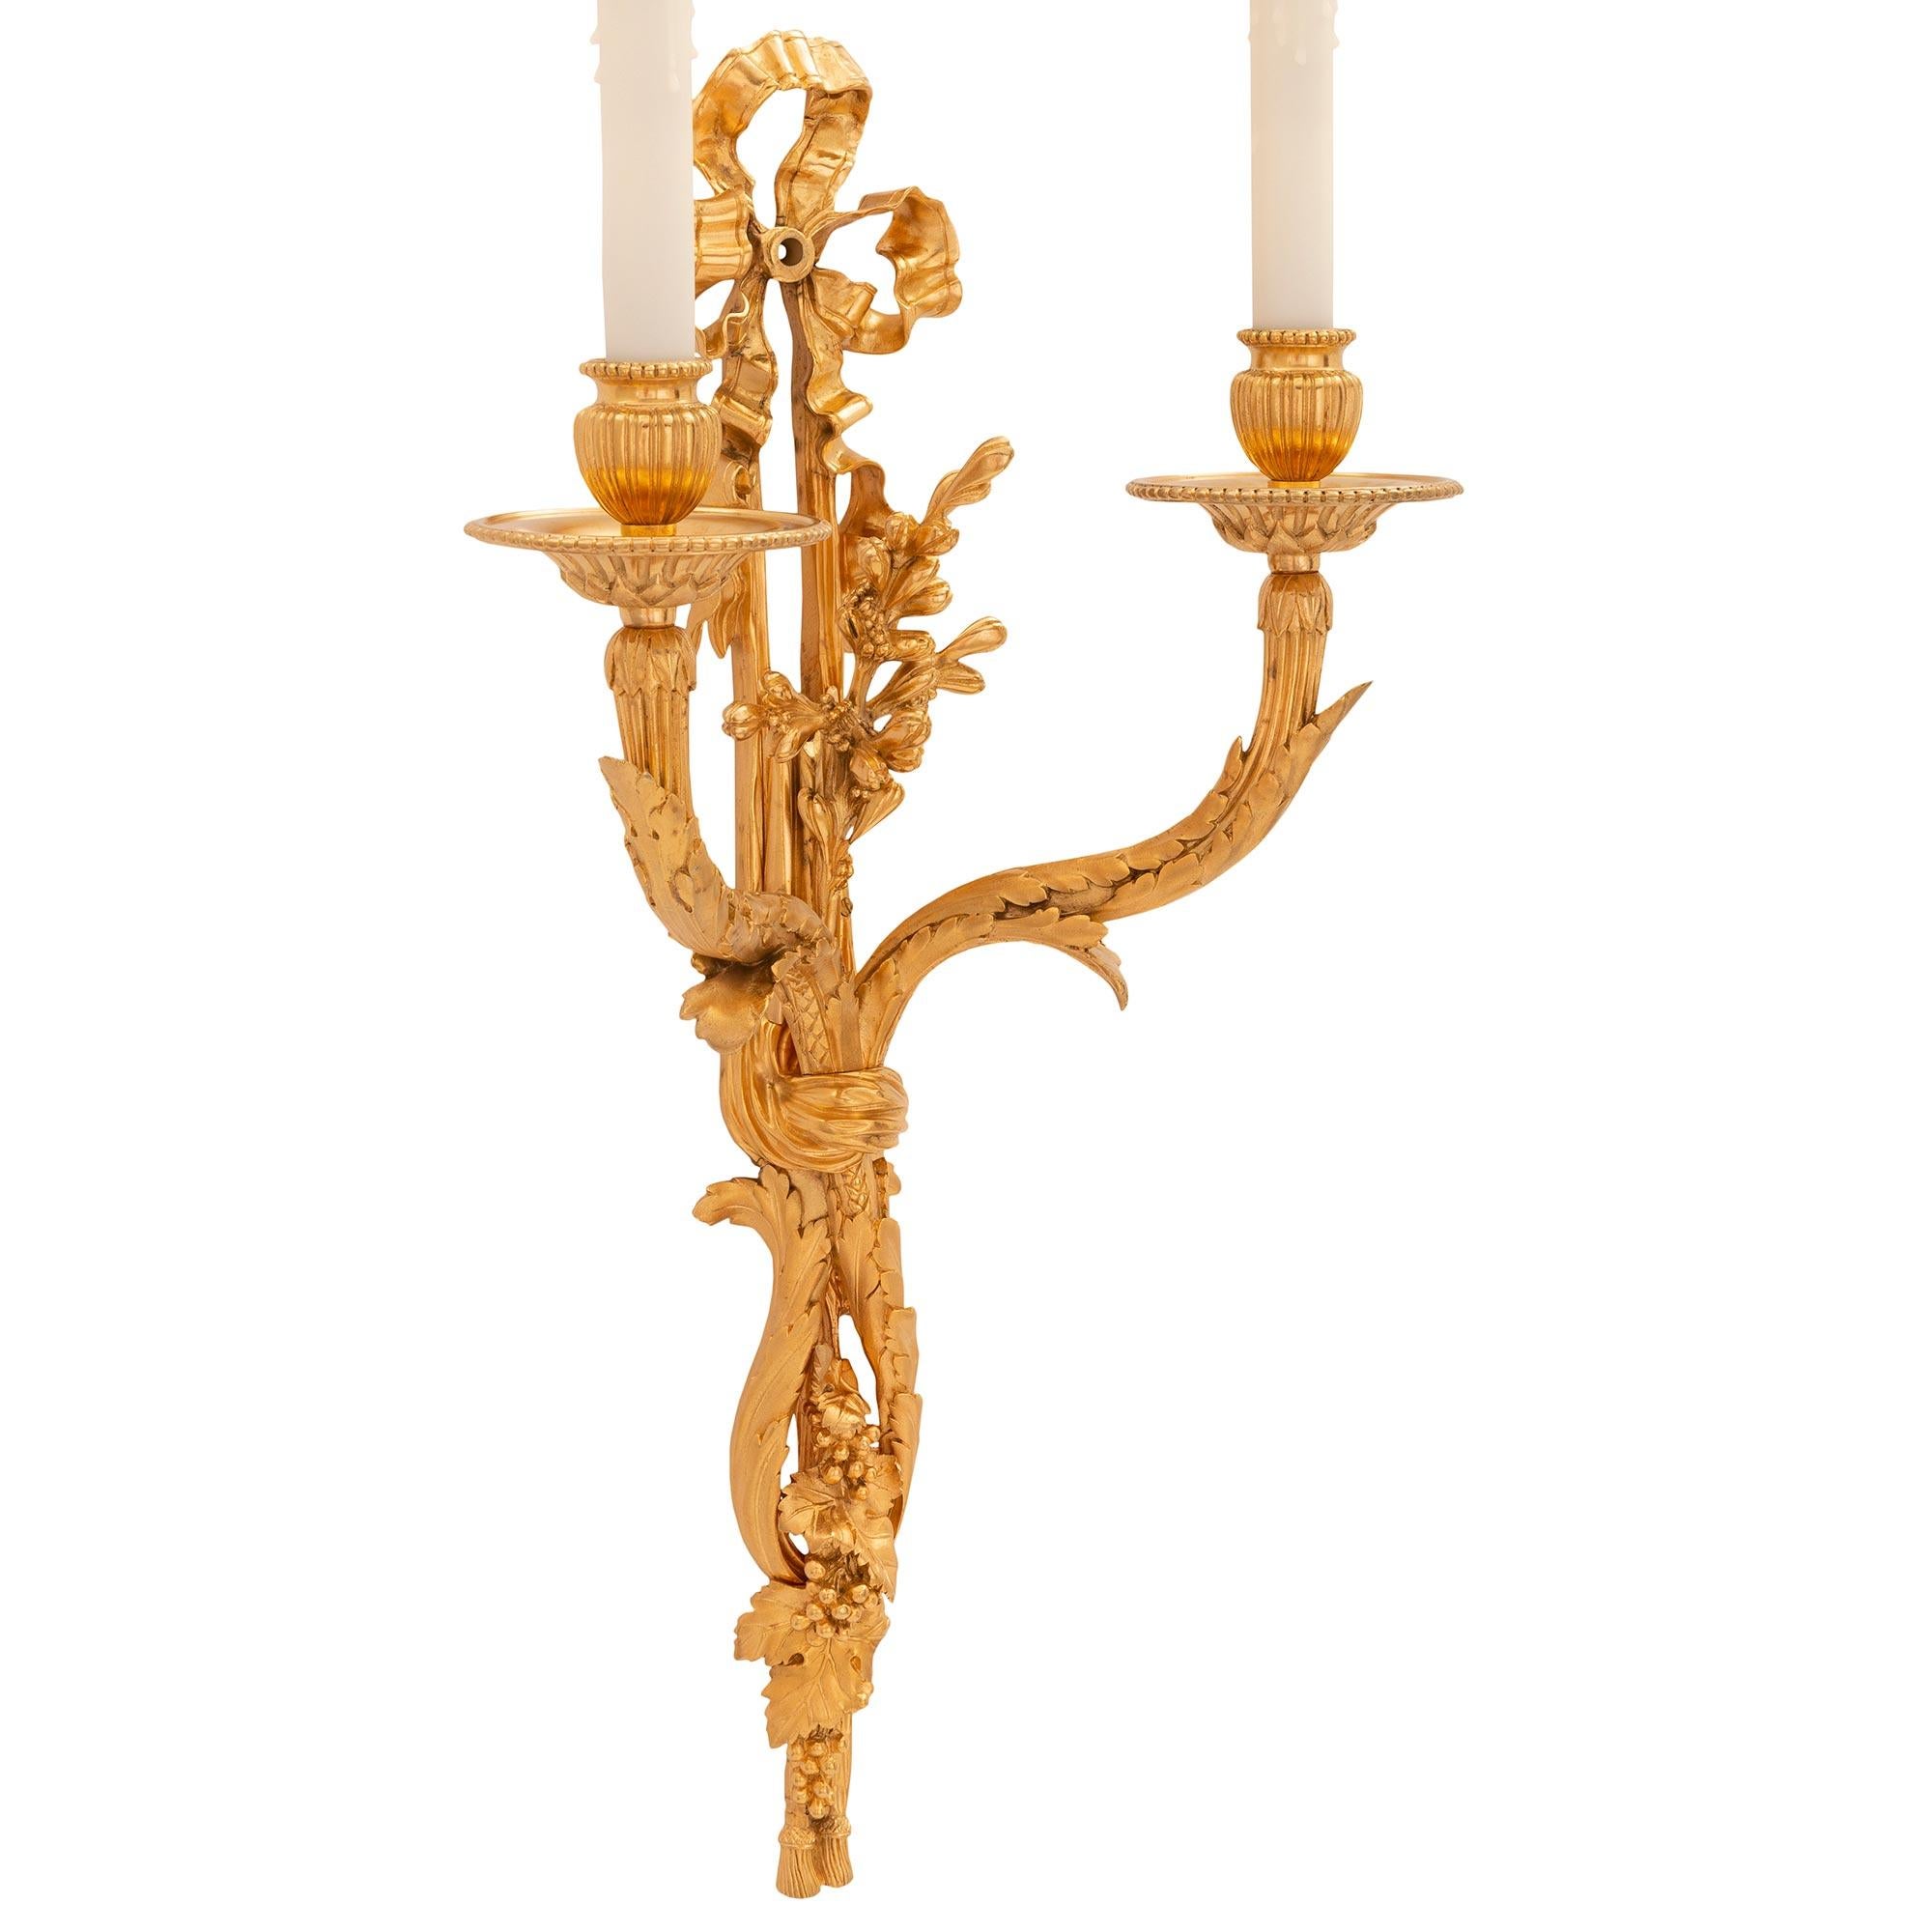 An extremely high quality and rare set of four French 19th century Louis XVI st. Ormolu sconces. Each two arm sconce displays sensationally chased grapes and vines below the scrolled reeded arms, decorated with large overlapping acanthus leaves.